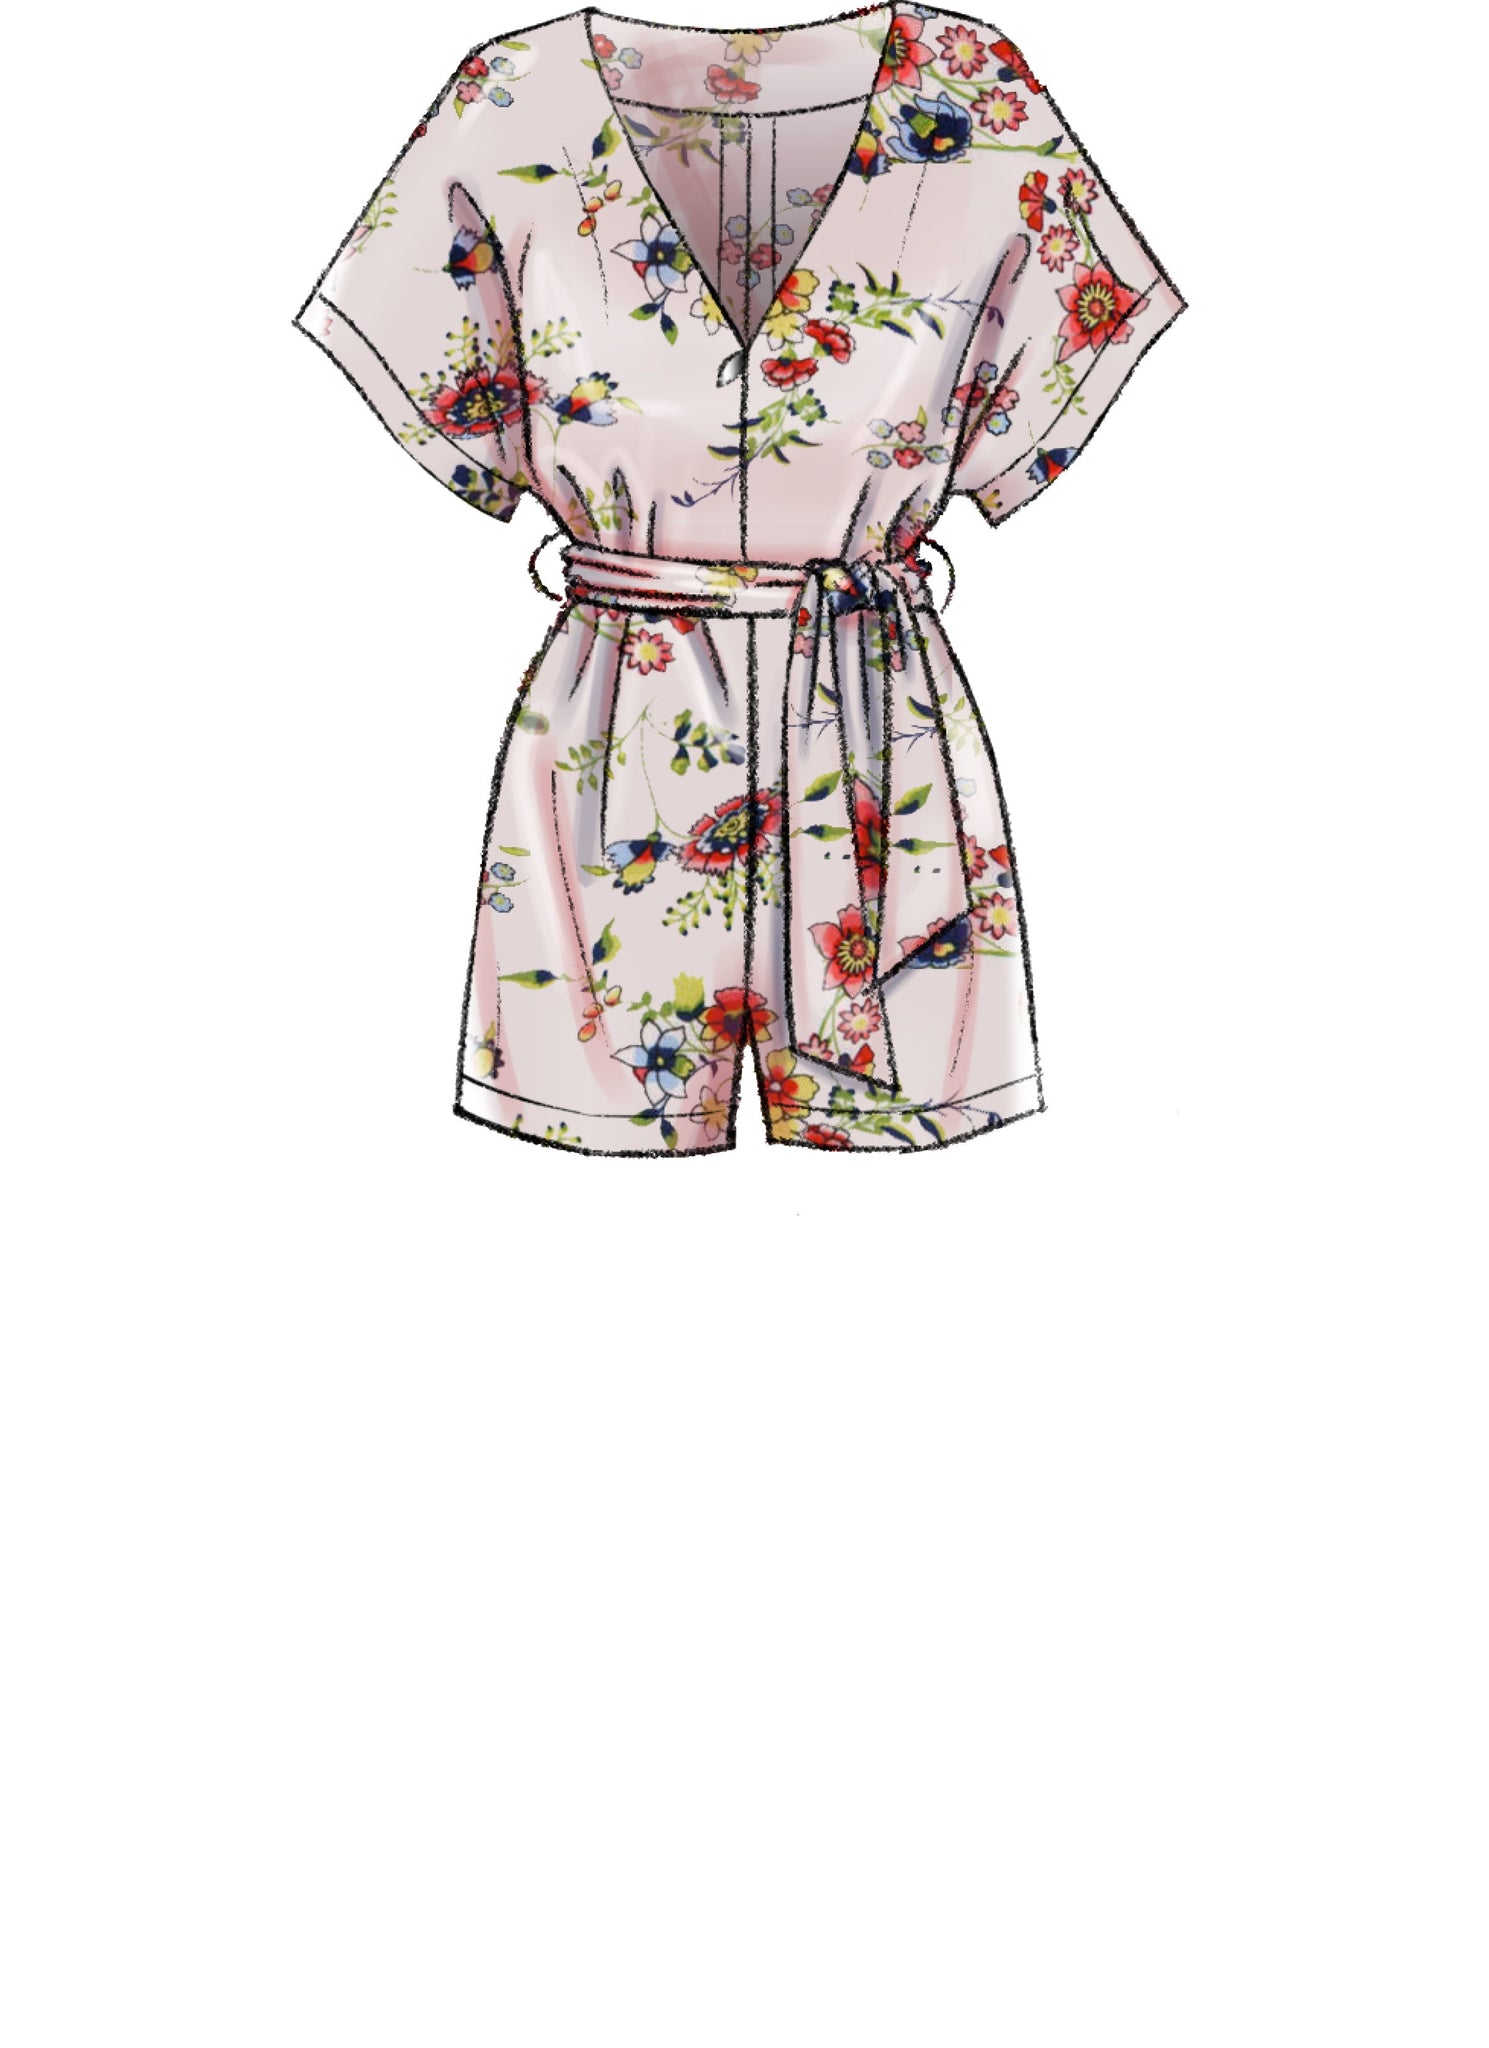 McCall's Misses'/Miss Petite Pleated, Drop-Waist Romper and